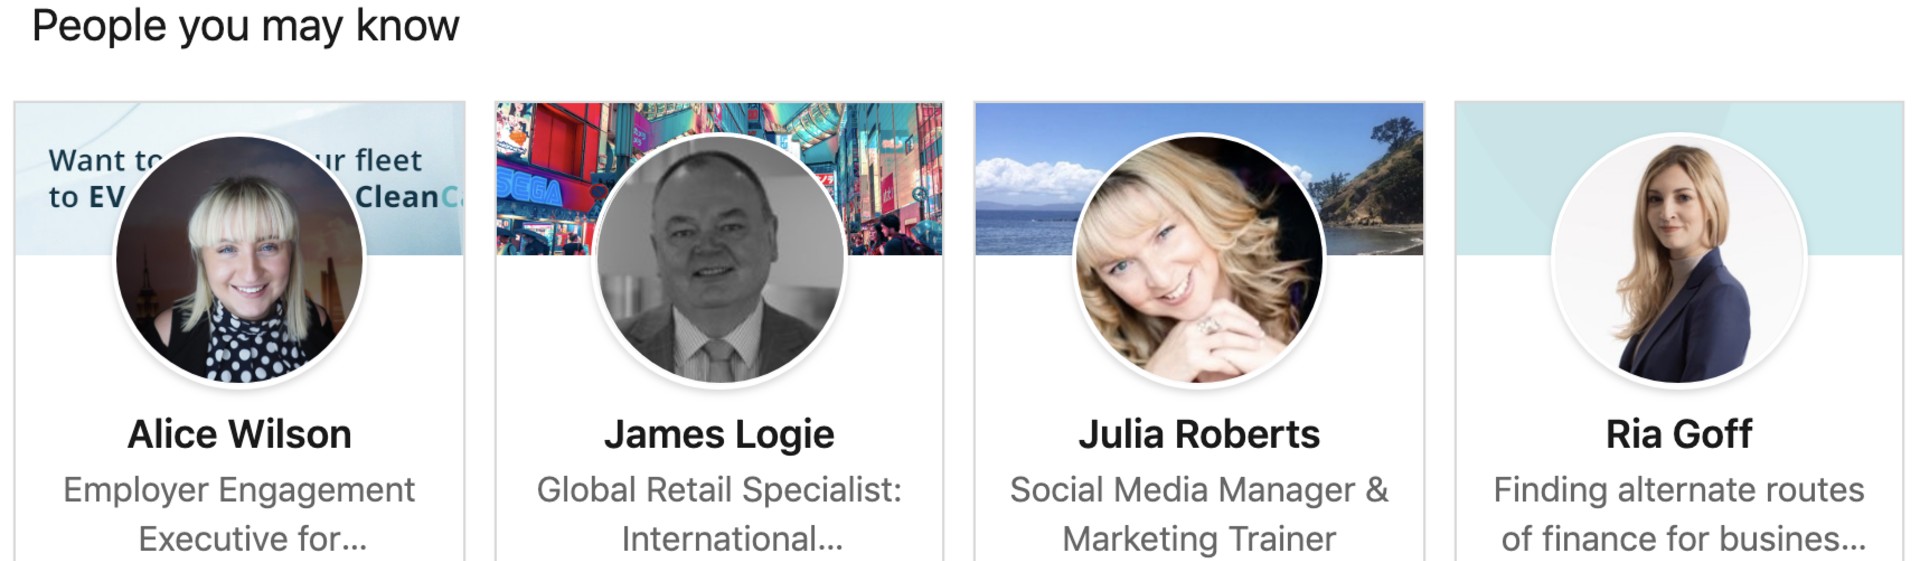 People You May Know on LinkedIn